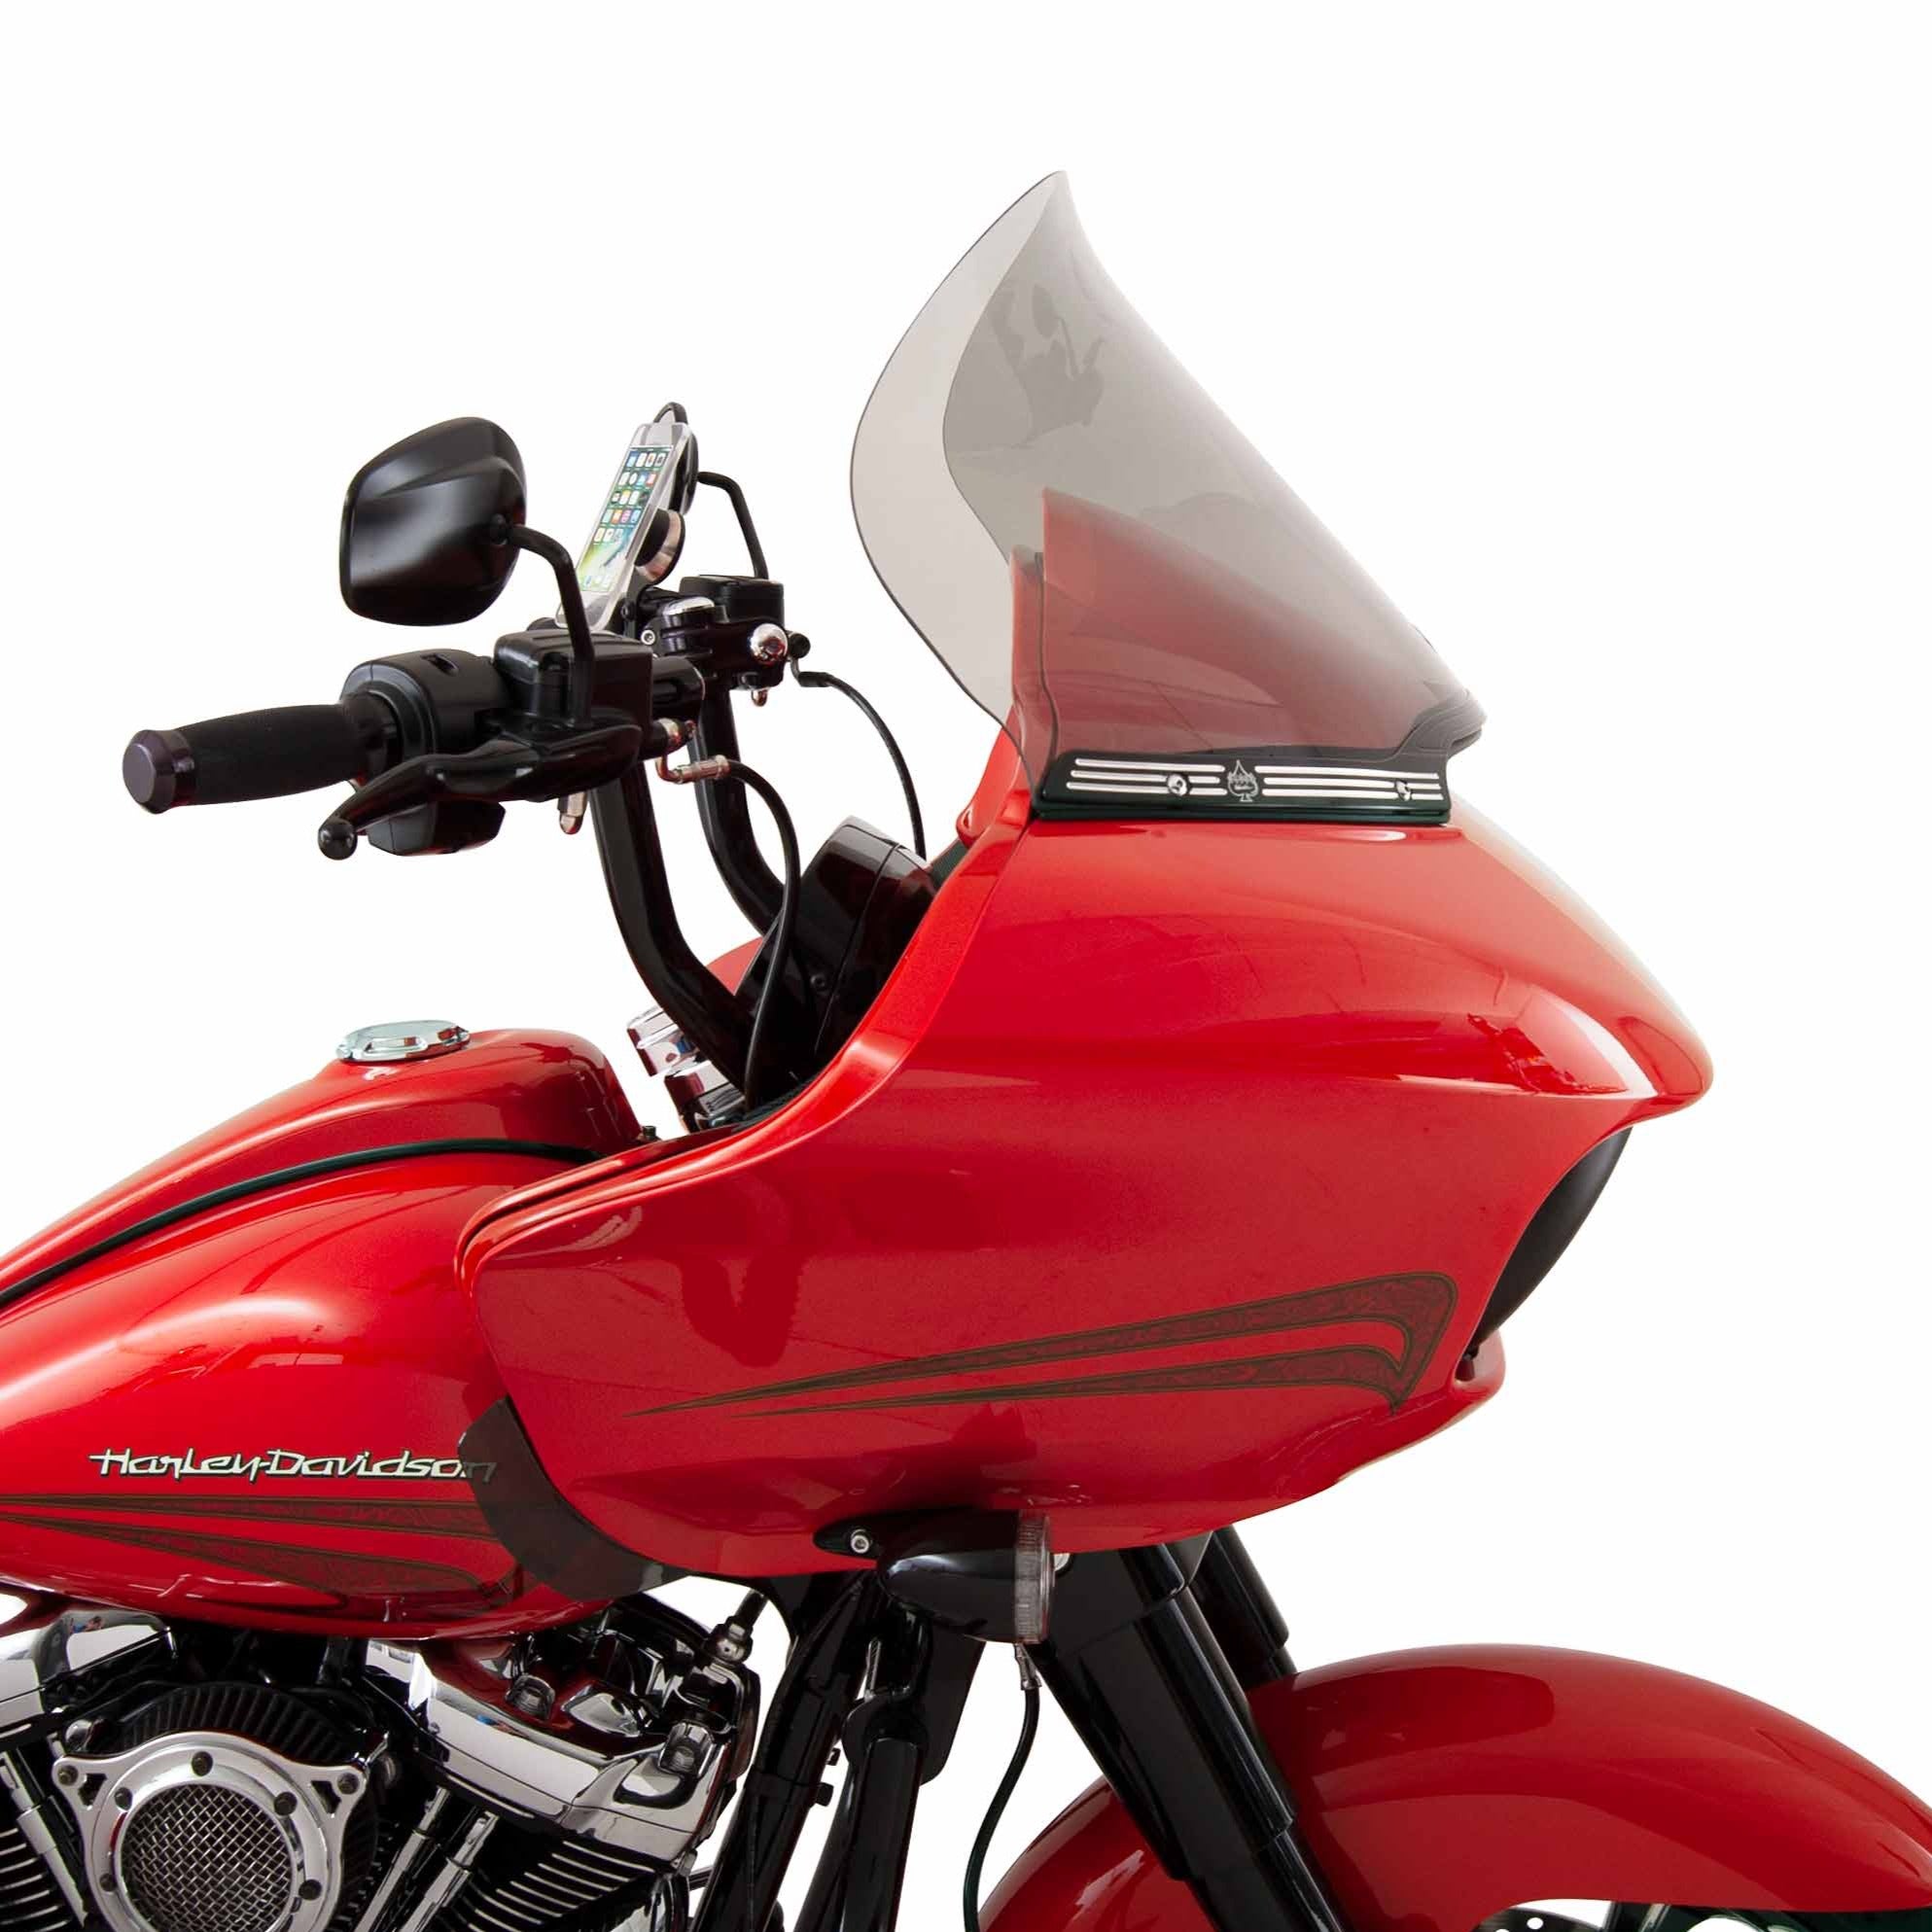 12" Pro-Touring Tint Flare™ Windshields for Harley-Davidson 2015-2023 Road Glide motorcycle models(15" Pro-Touring - Tint)